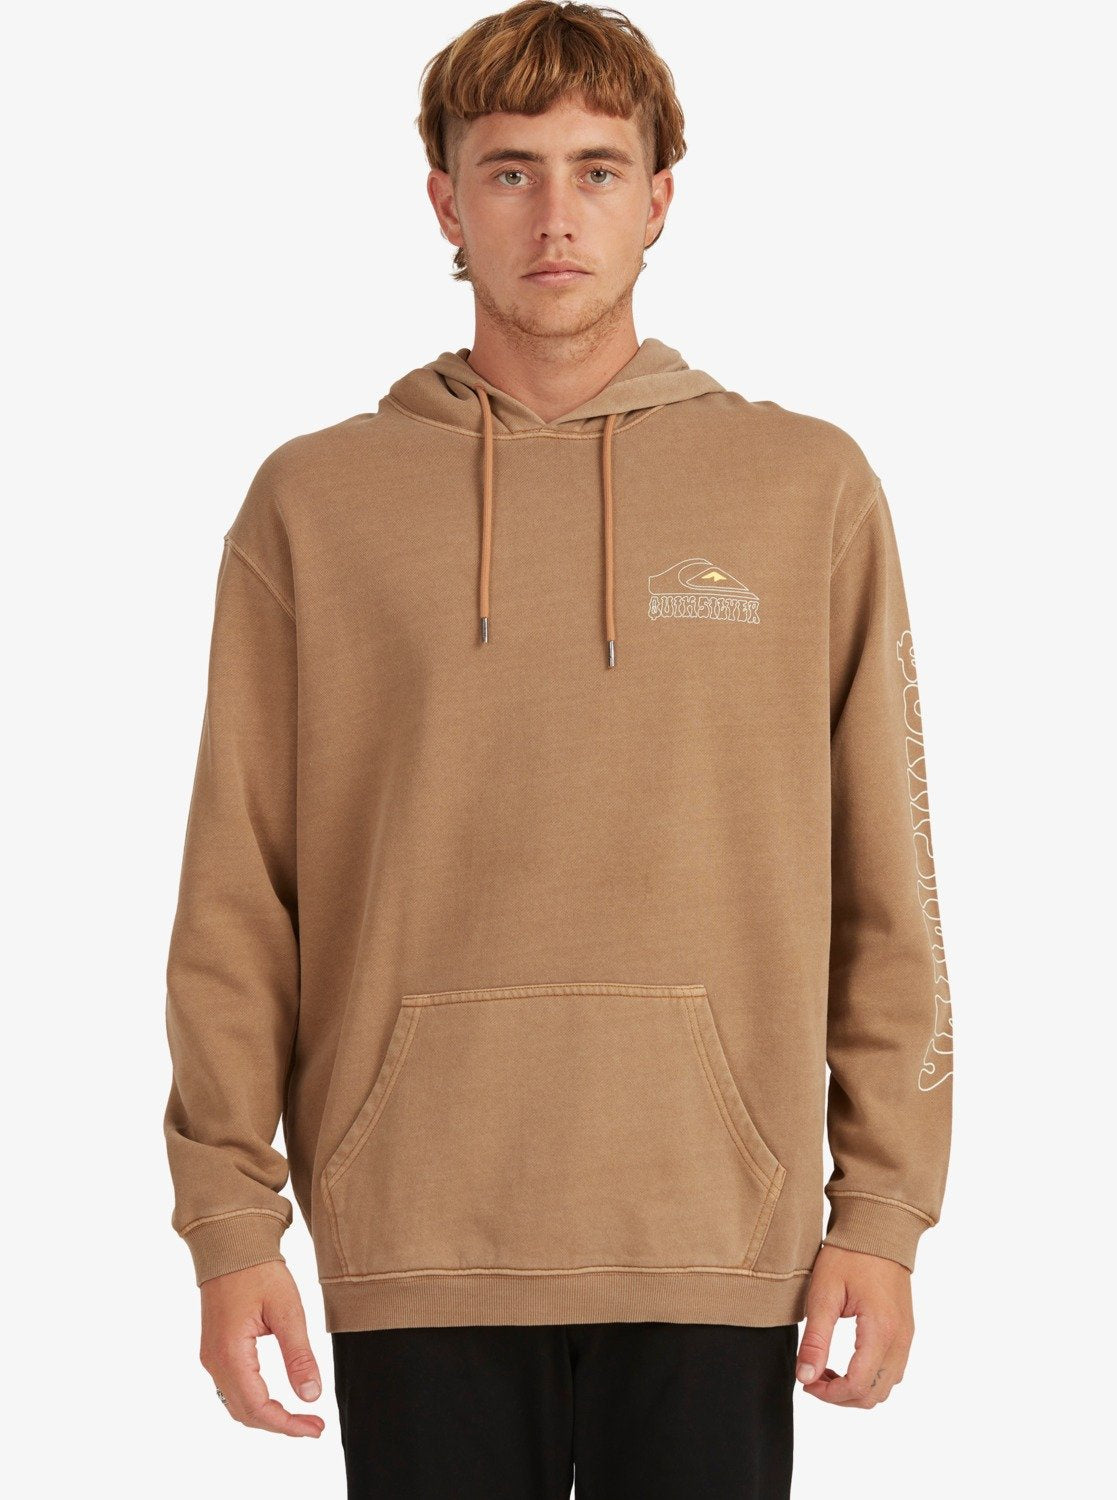 Mens Southwest Unplugged Hoodie